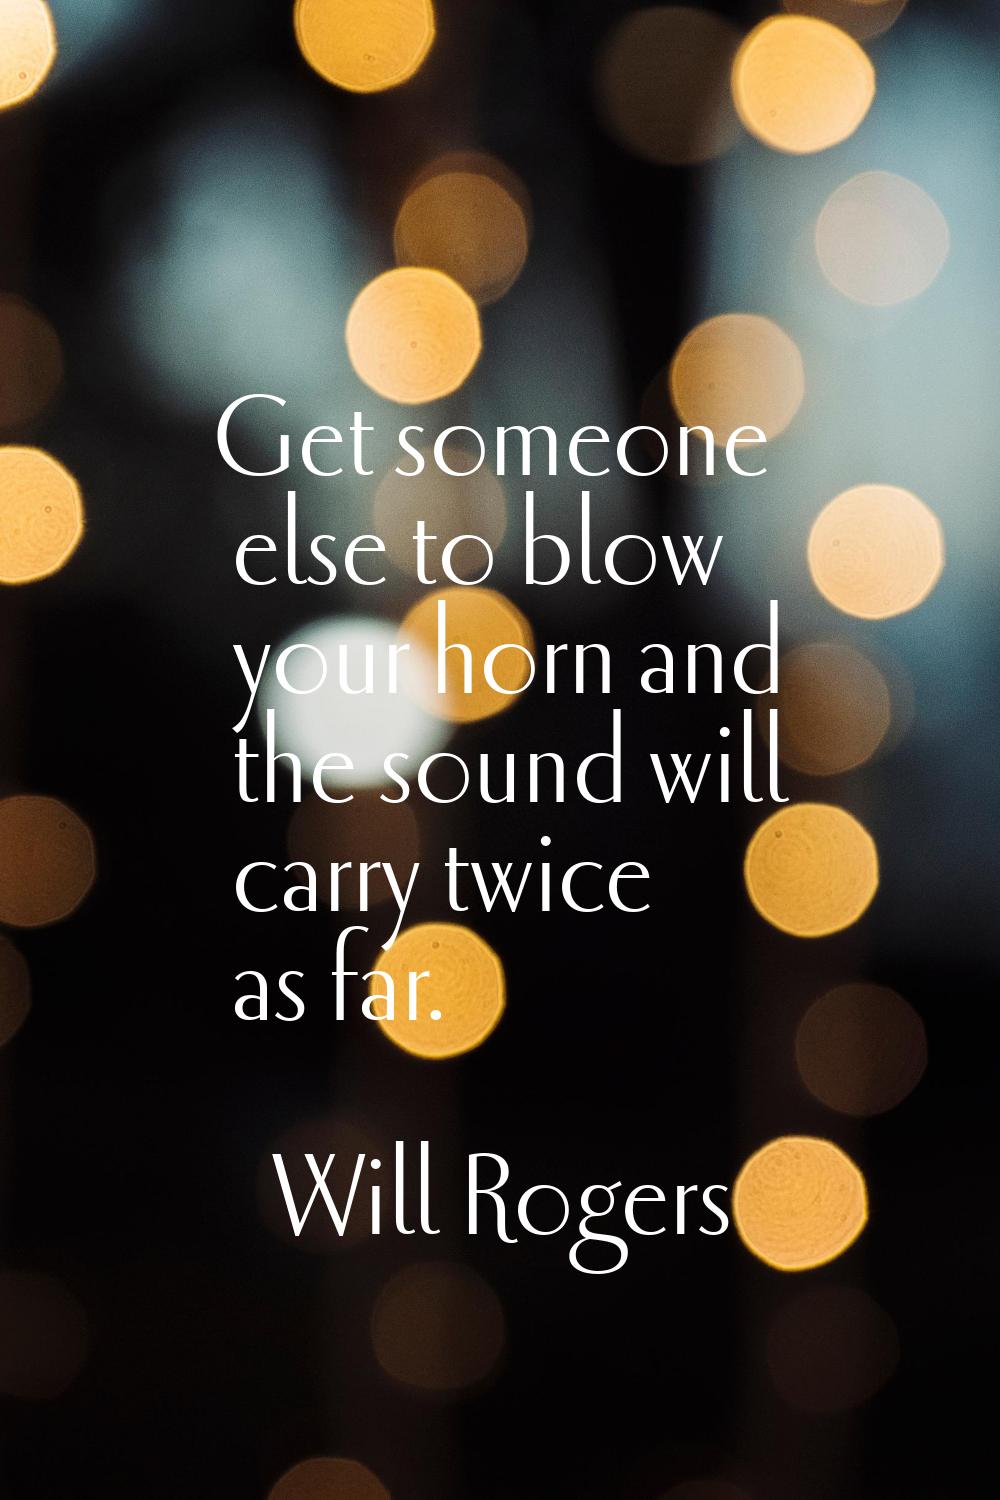 Get someone else to blow your horn and the sound will carry twice as far.